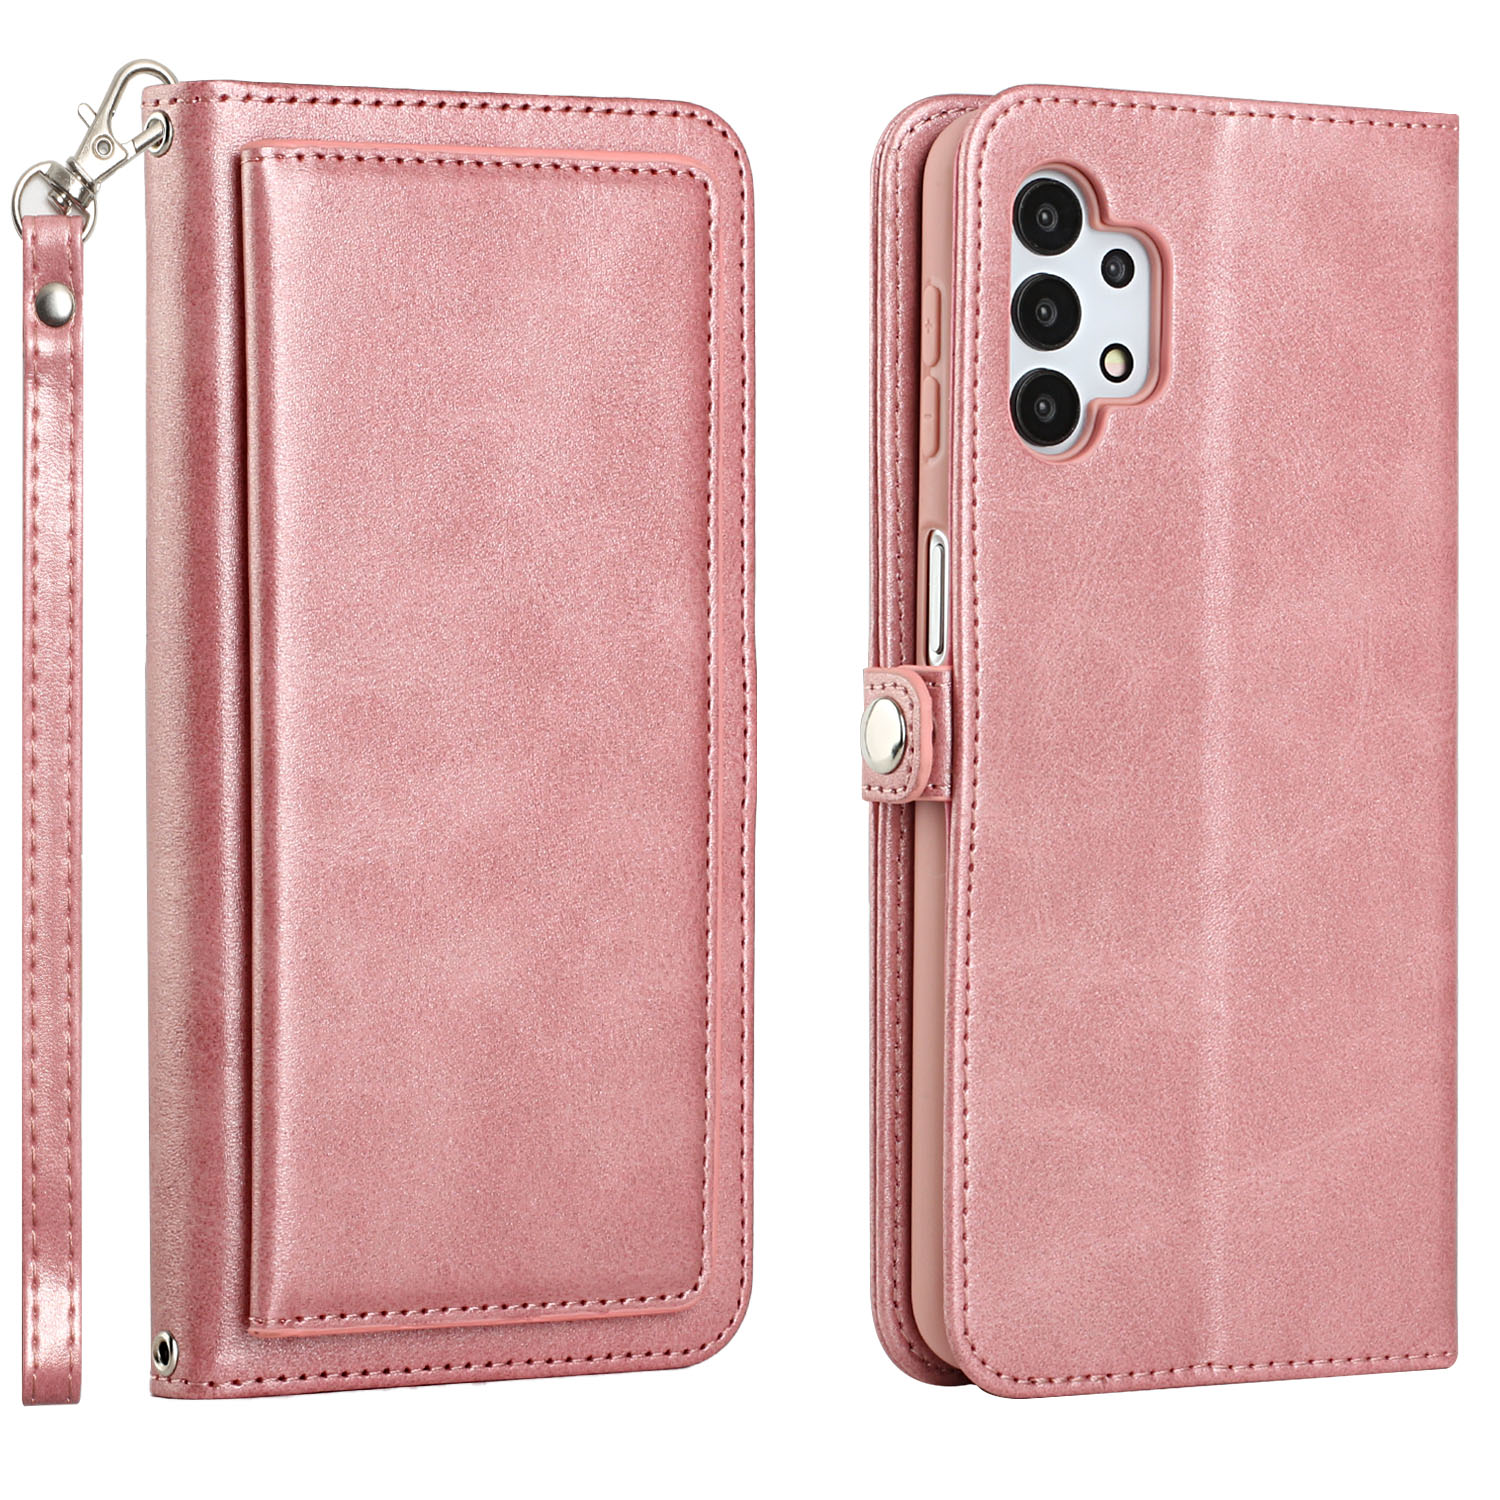 Premium PU Leather Folio WALLET Front Cover Case for Galaxy A32 5G (Rose Gold)